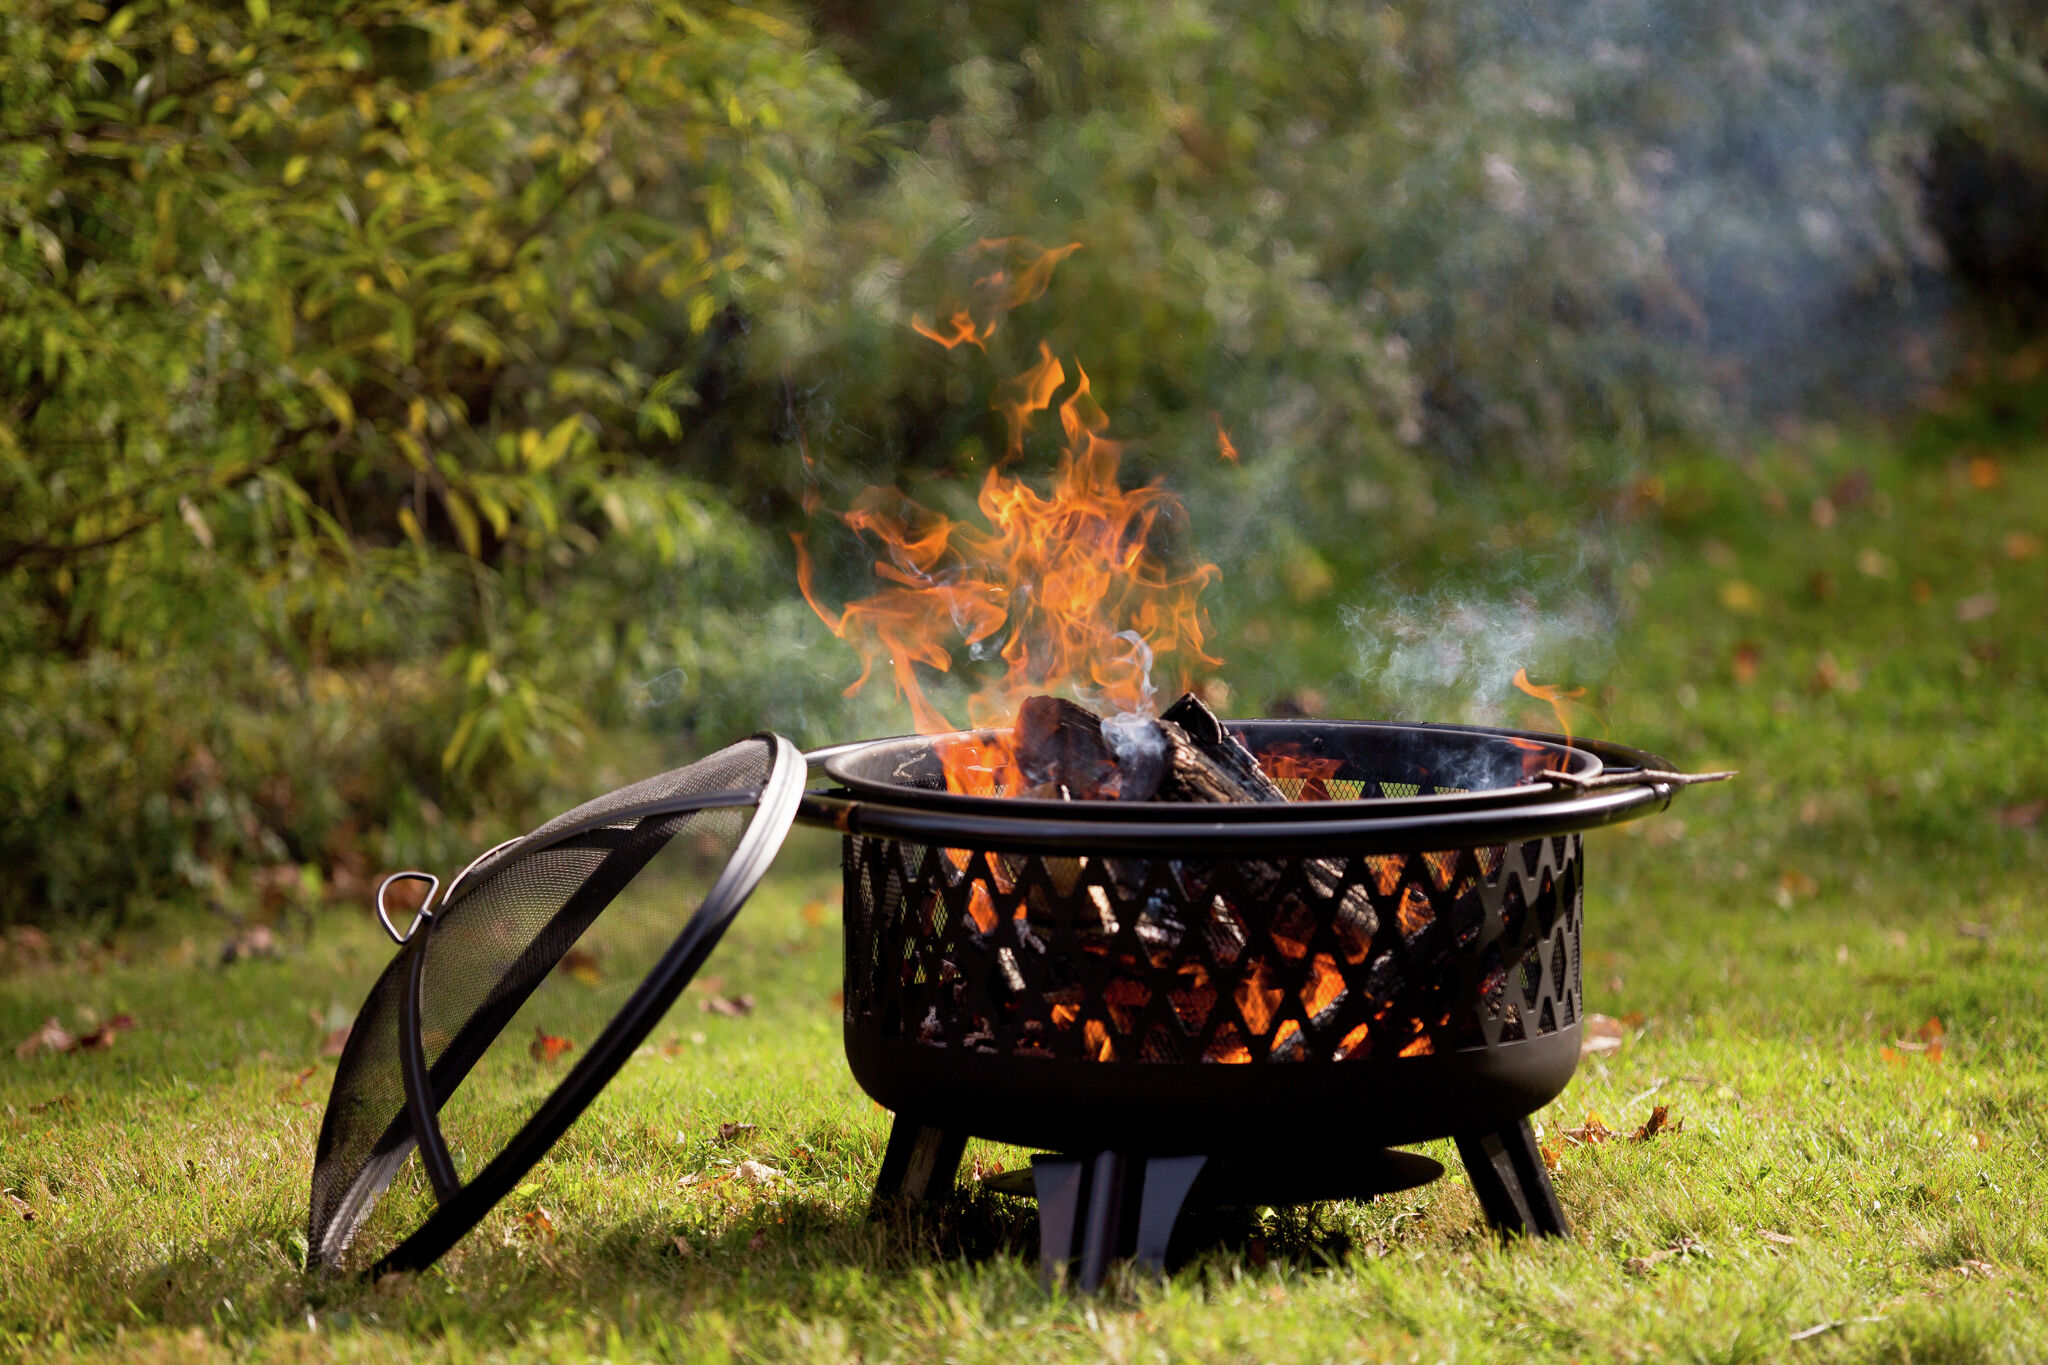 Are fire pits safe?